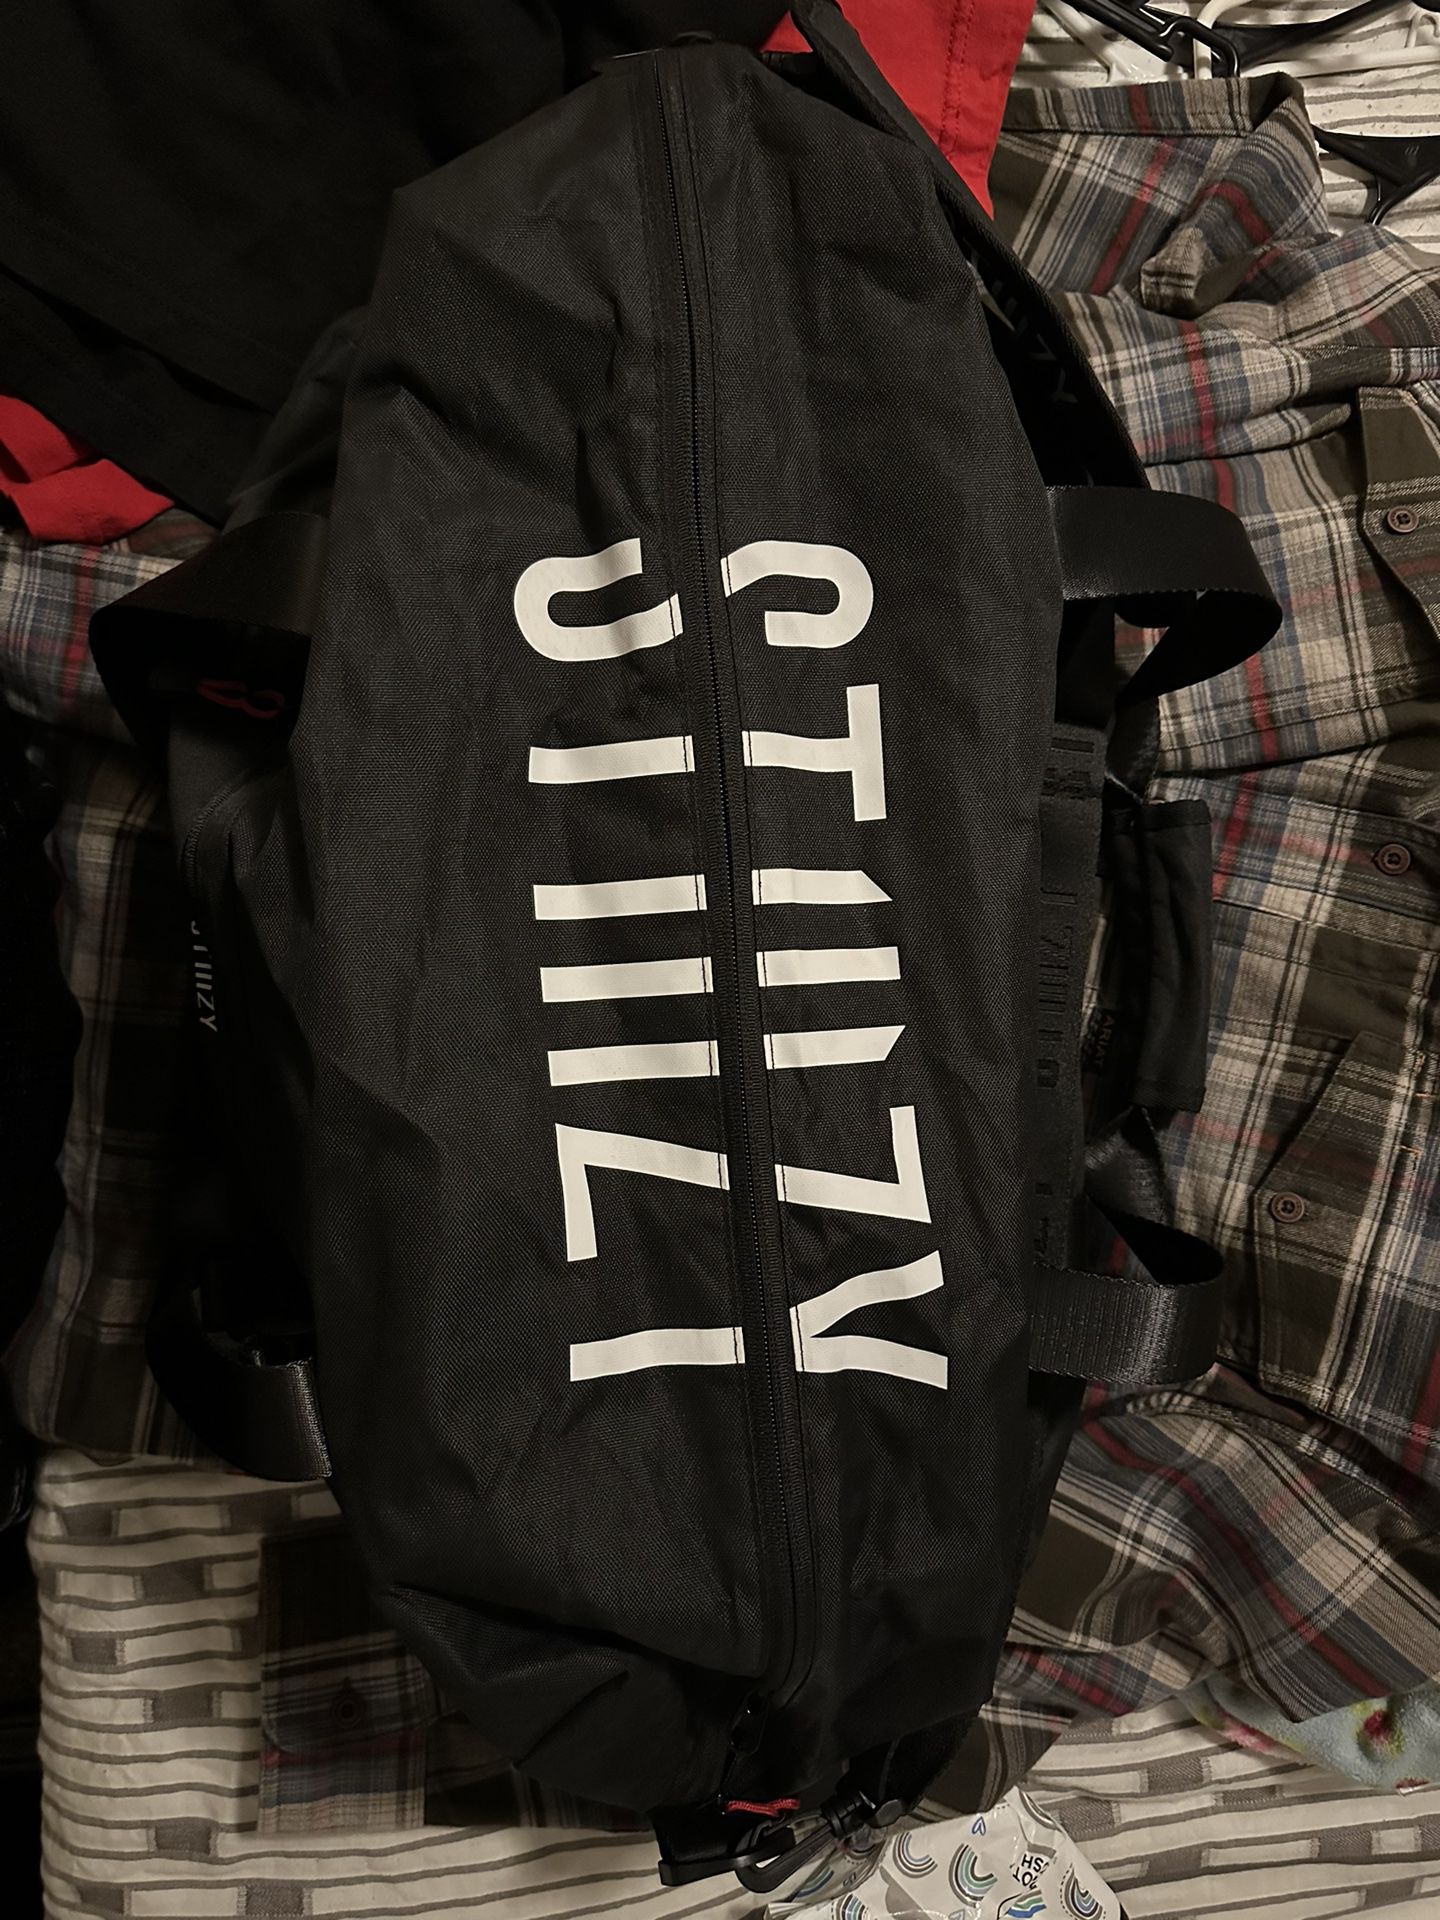 Limited Edition Stizzy Bag